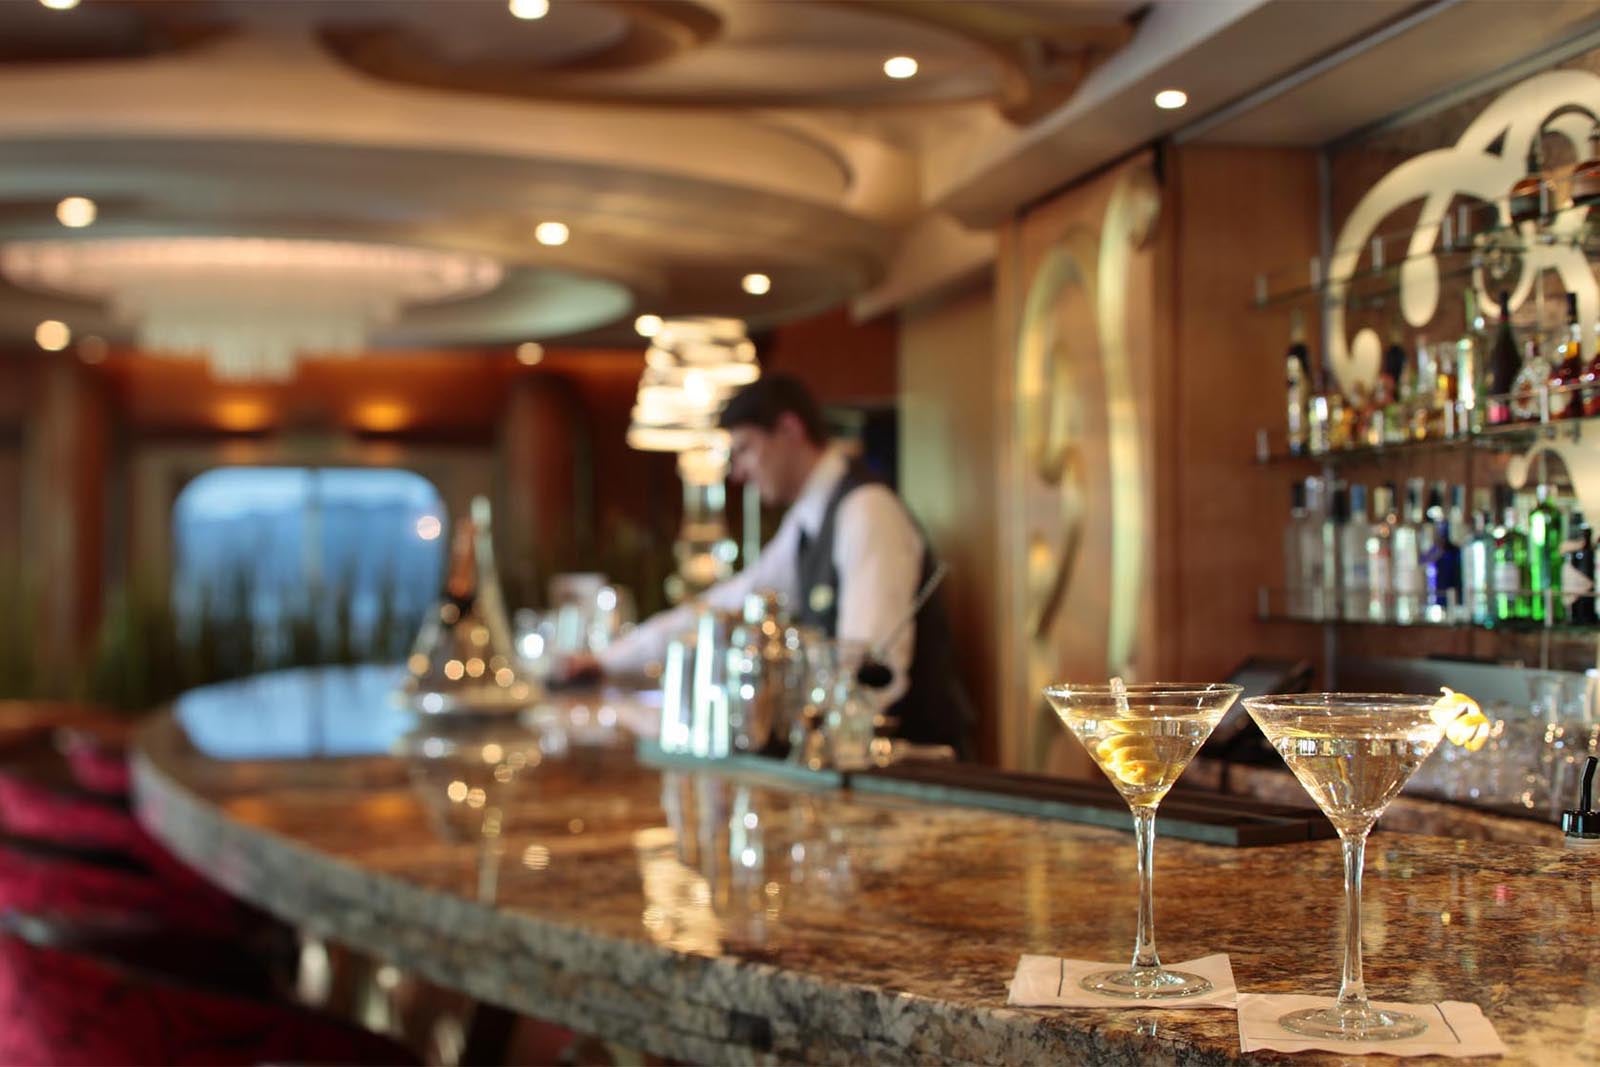 8 best drinks to order with a cruise ship beverage package (and 3 to avoid)